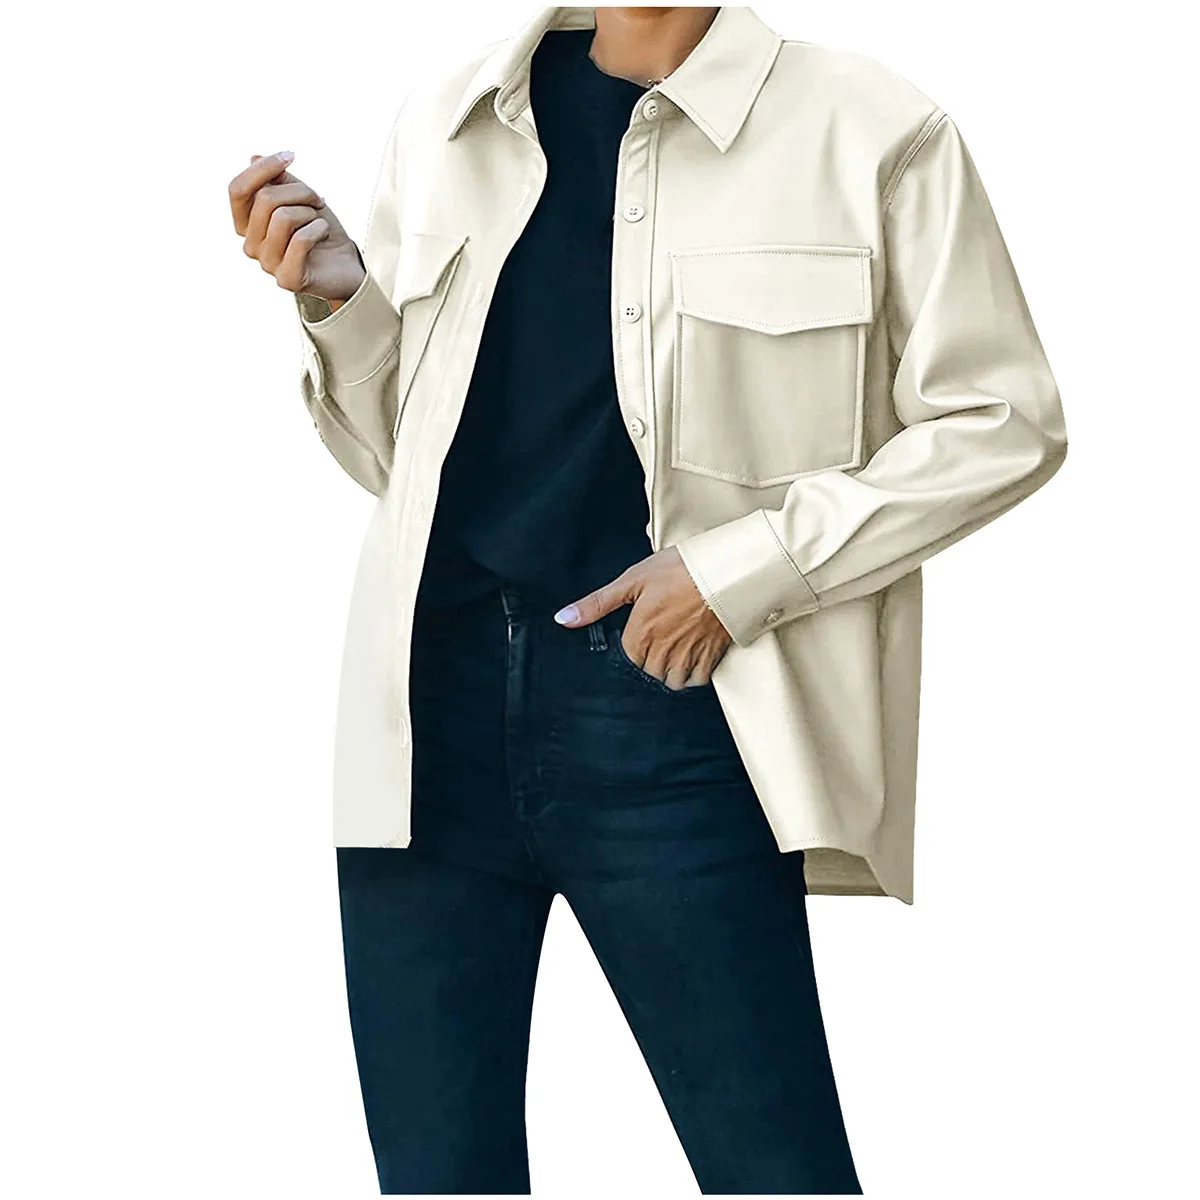 Women's Front Bbutton Faux Leather Jacket Casual Solid Color Button with Pockets Coat Casual Female Outerwear Jackets Streetwear enlarge